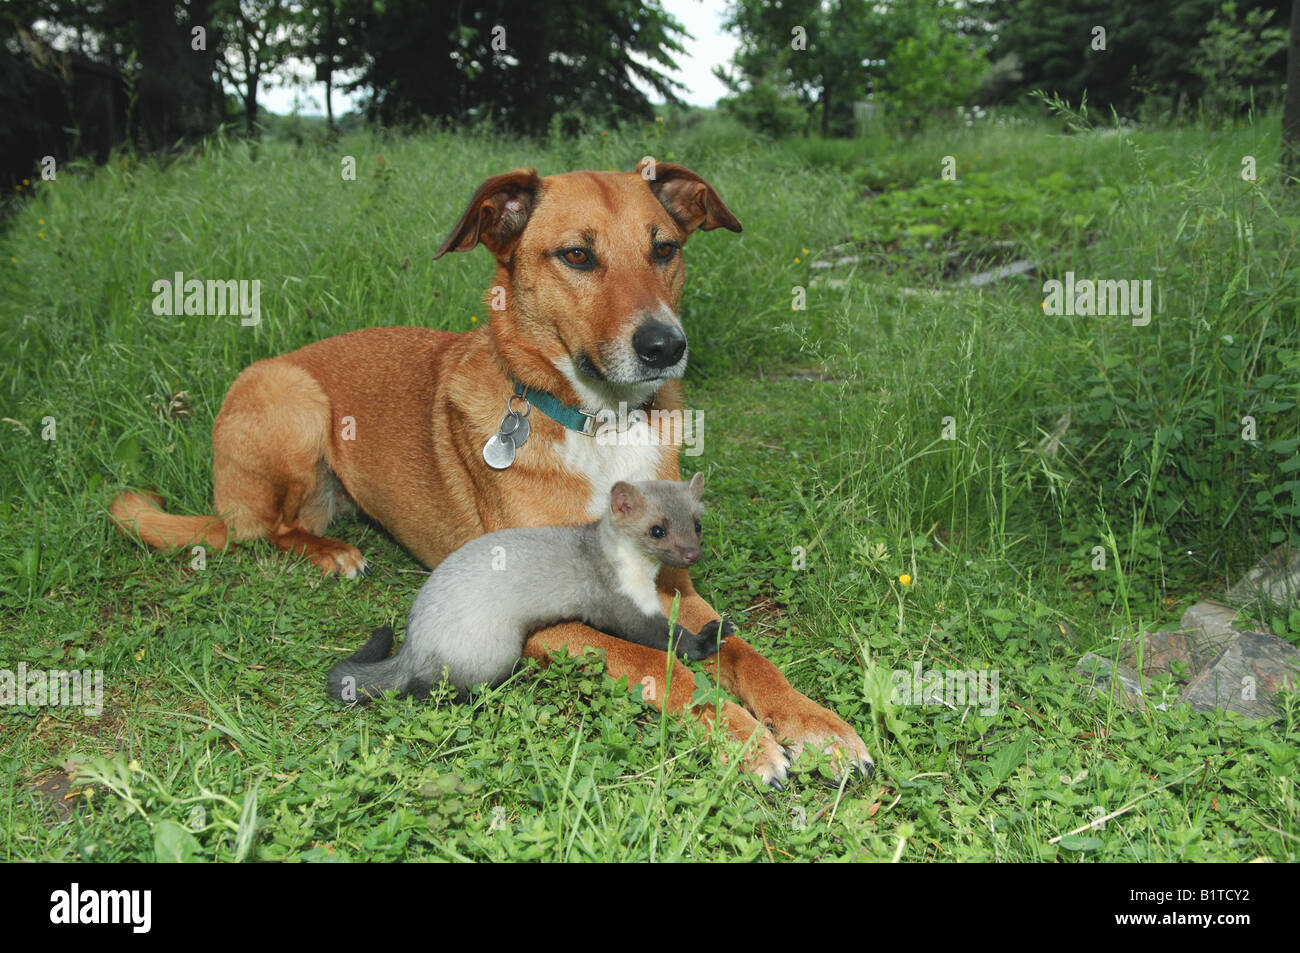 animal friendship: half breed dog and young beech marten on meadow Stock Photo